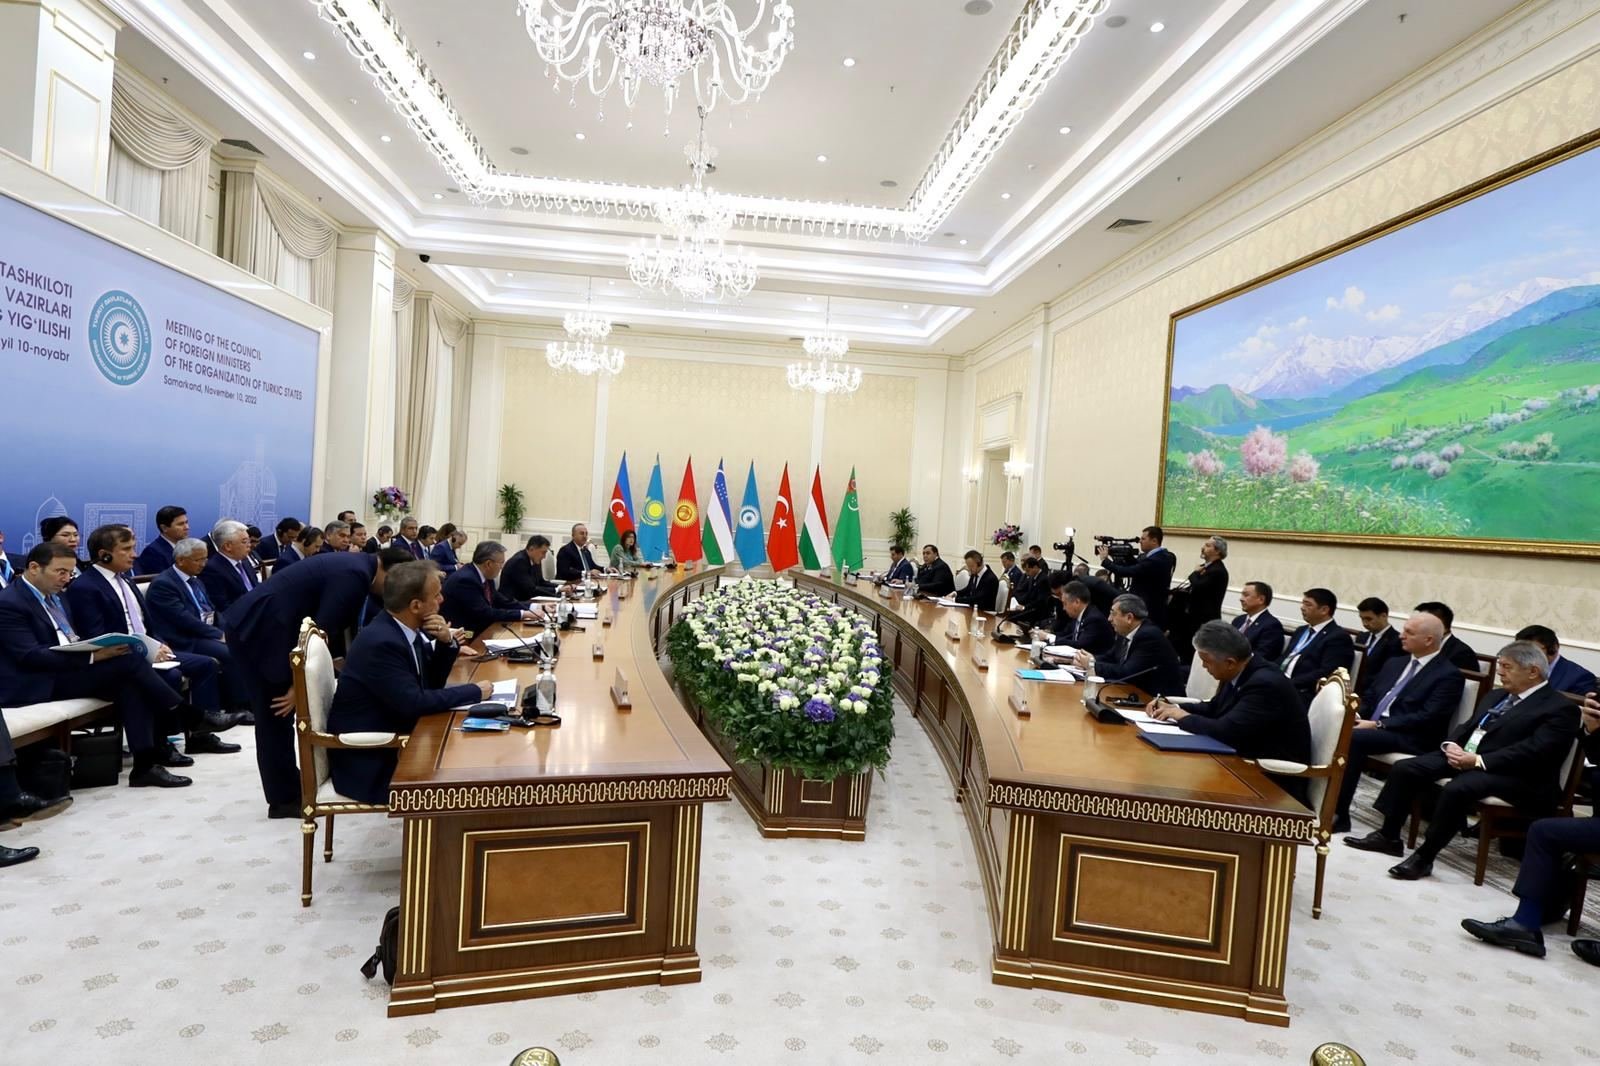 Meeting of FMs of member countries of Organization of Turkic States kicks off (PHOTO)